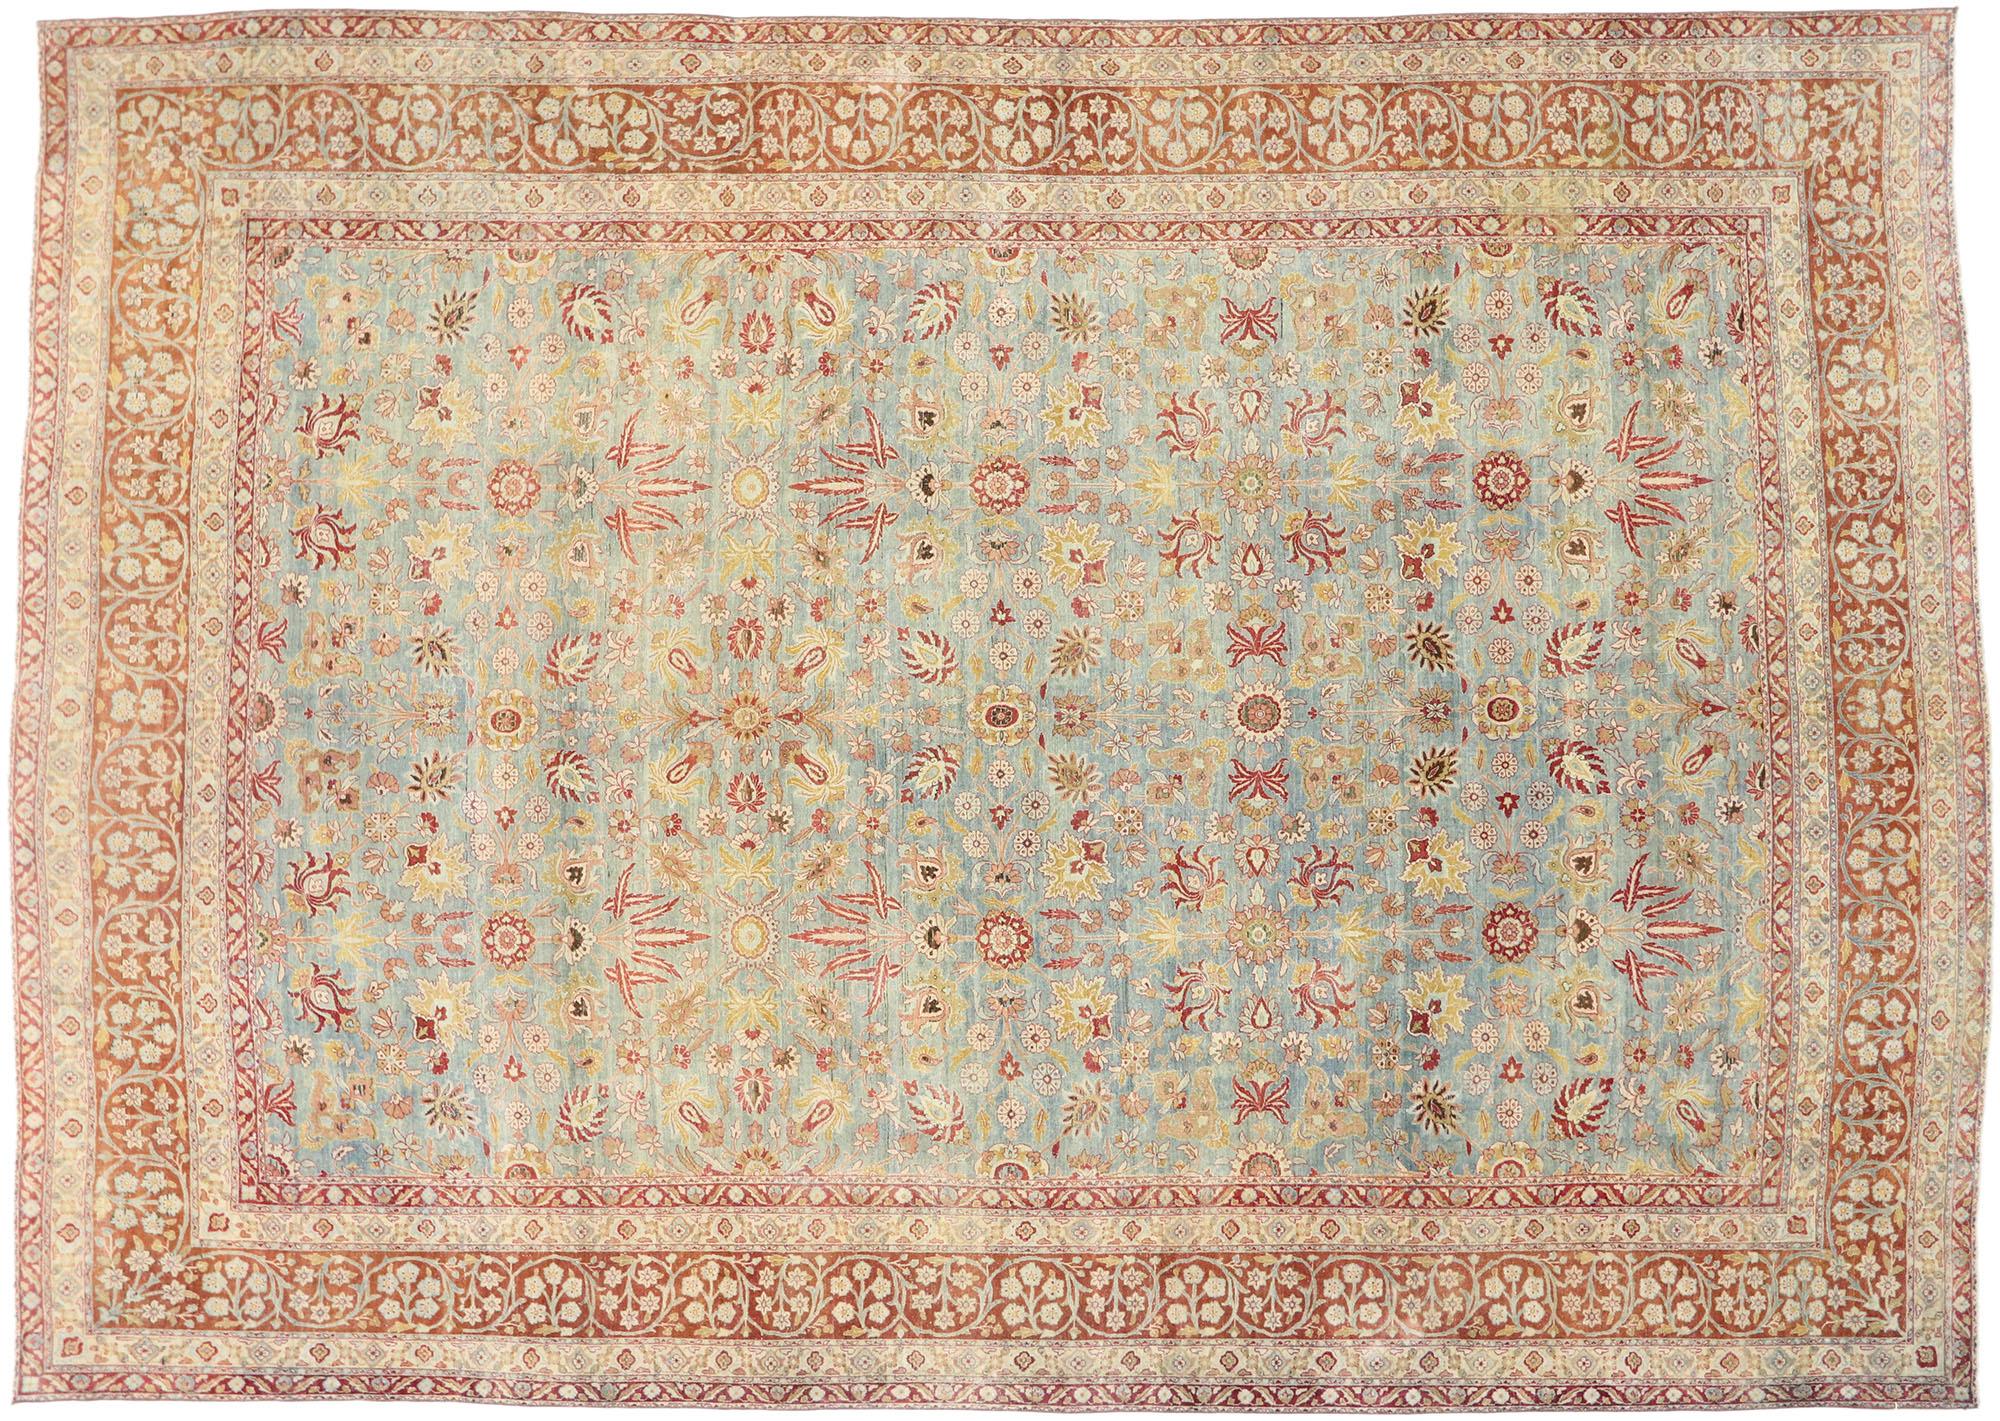 Wool Distressed Antique Persian Kerman Rug with Southern Living and Colonial Style